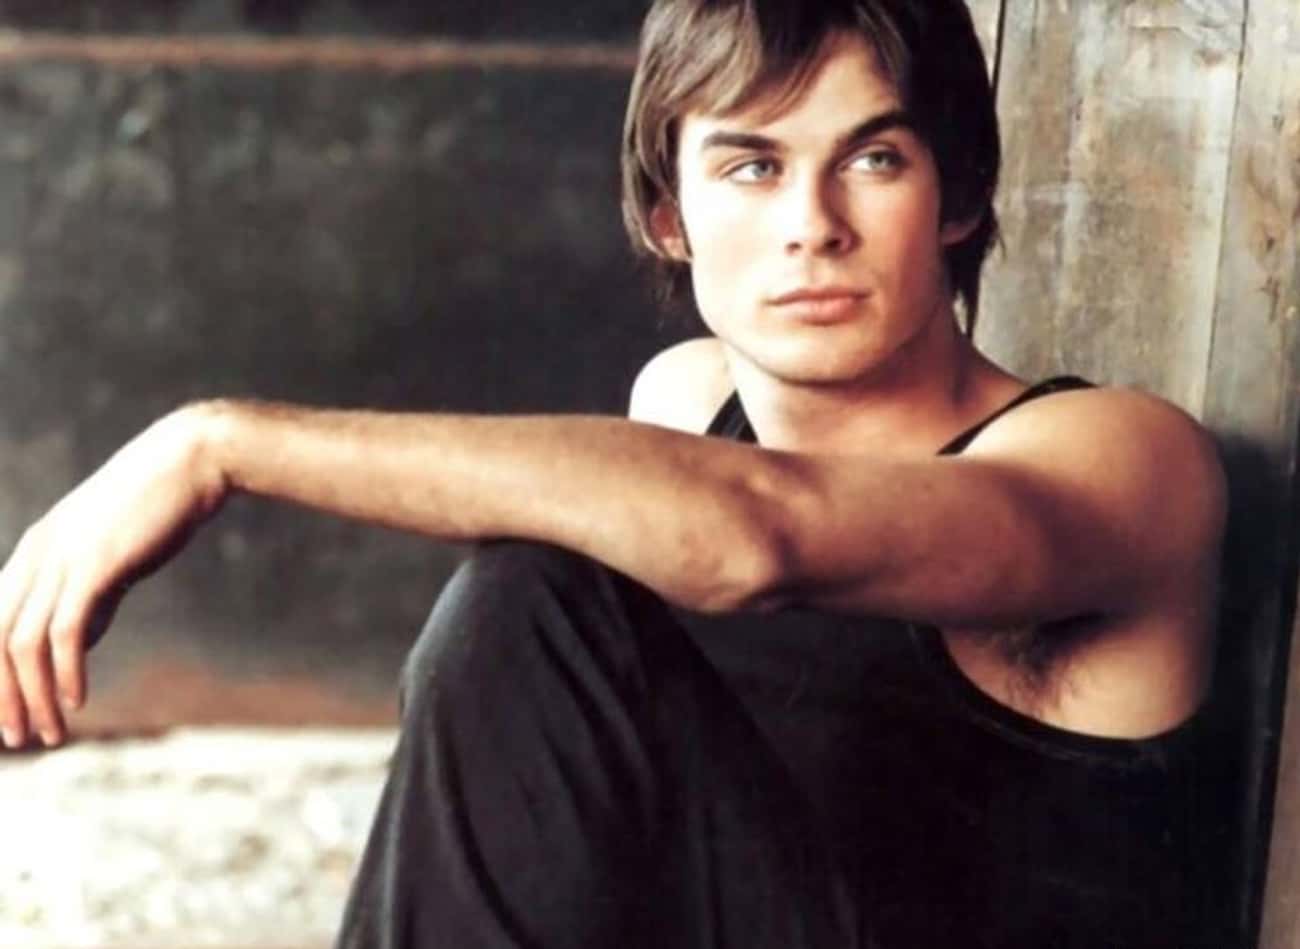 Young Ian Somerhalder in Black Tank Top and Black Pants